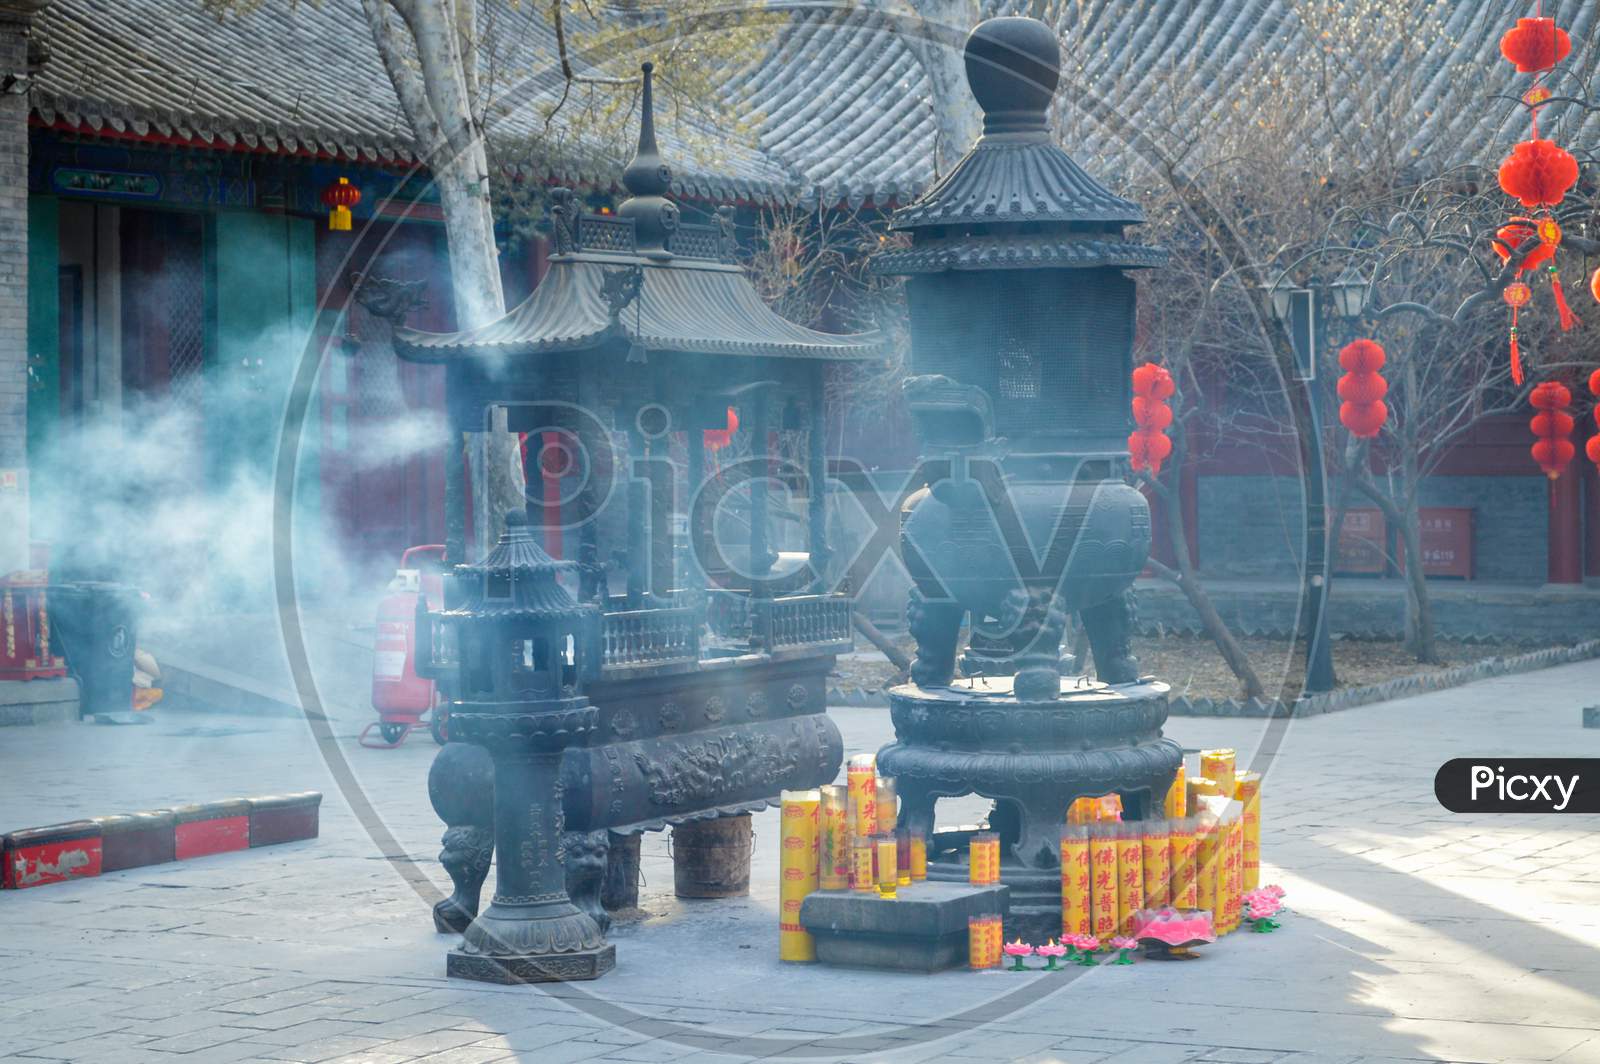 Fayuan Temple, Oldest Buddhist Temple In Beijing, China